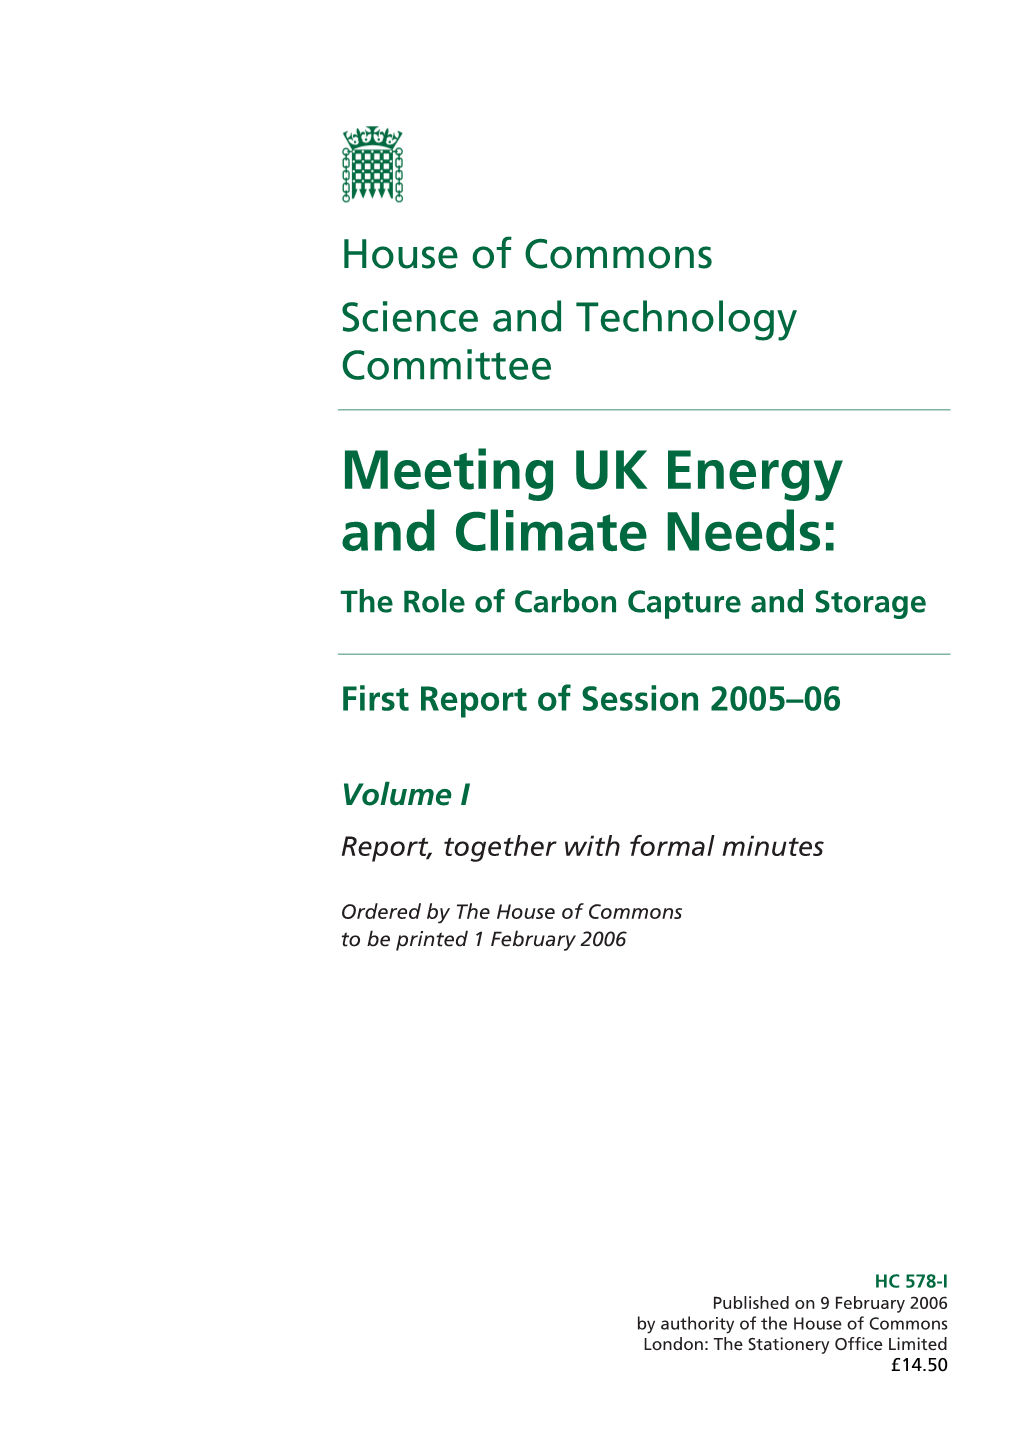 Meeting UK Energy and Climate Needs: the Role of Carbon Capture and Storage